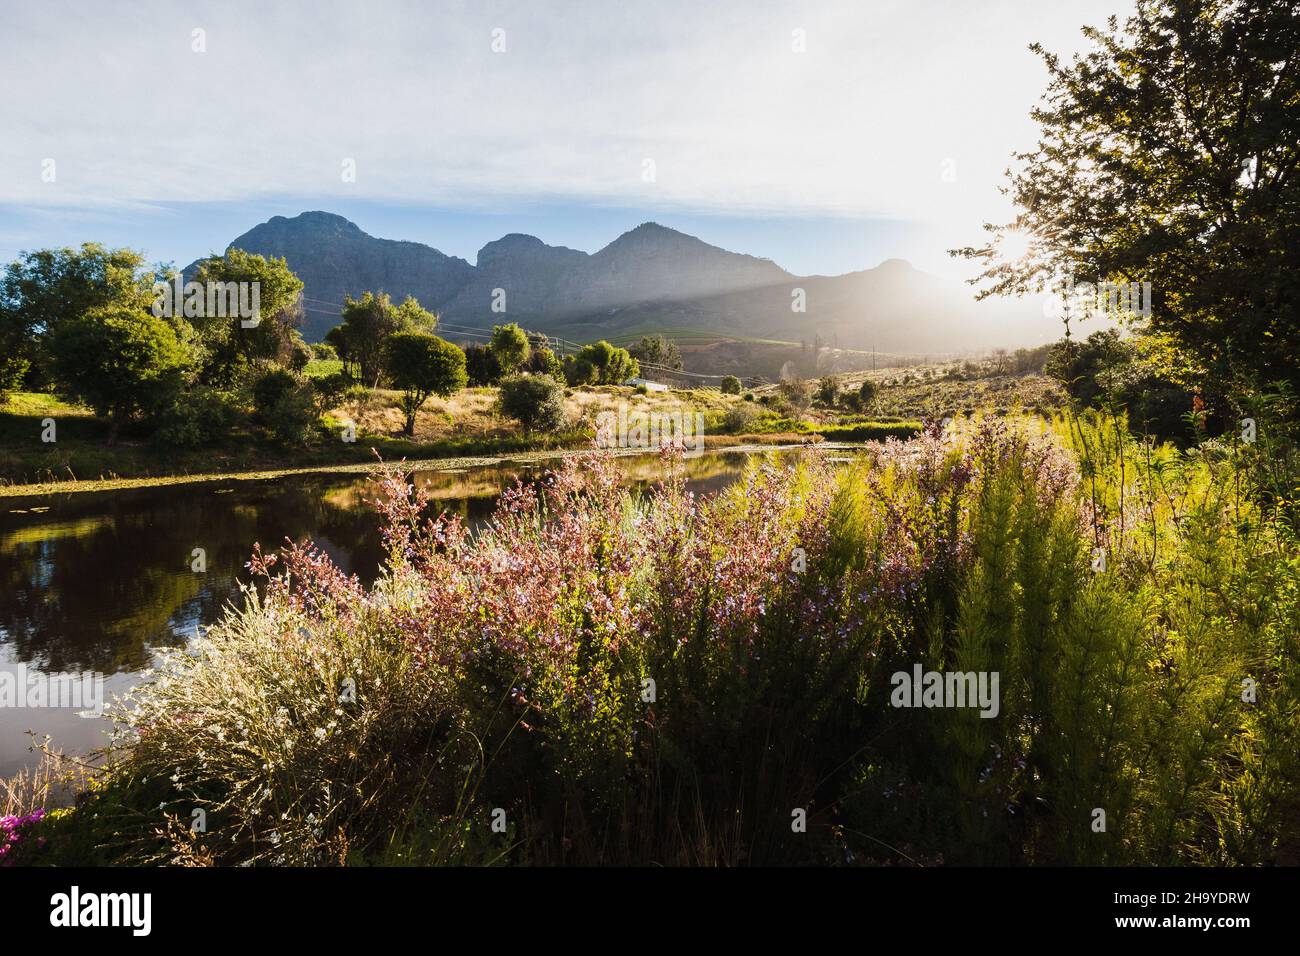 Sunset in the vineyard, somewhere between Franschoek and Stellenbosch, the wine region in South Africa Stock Photo